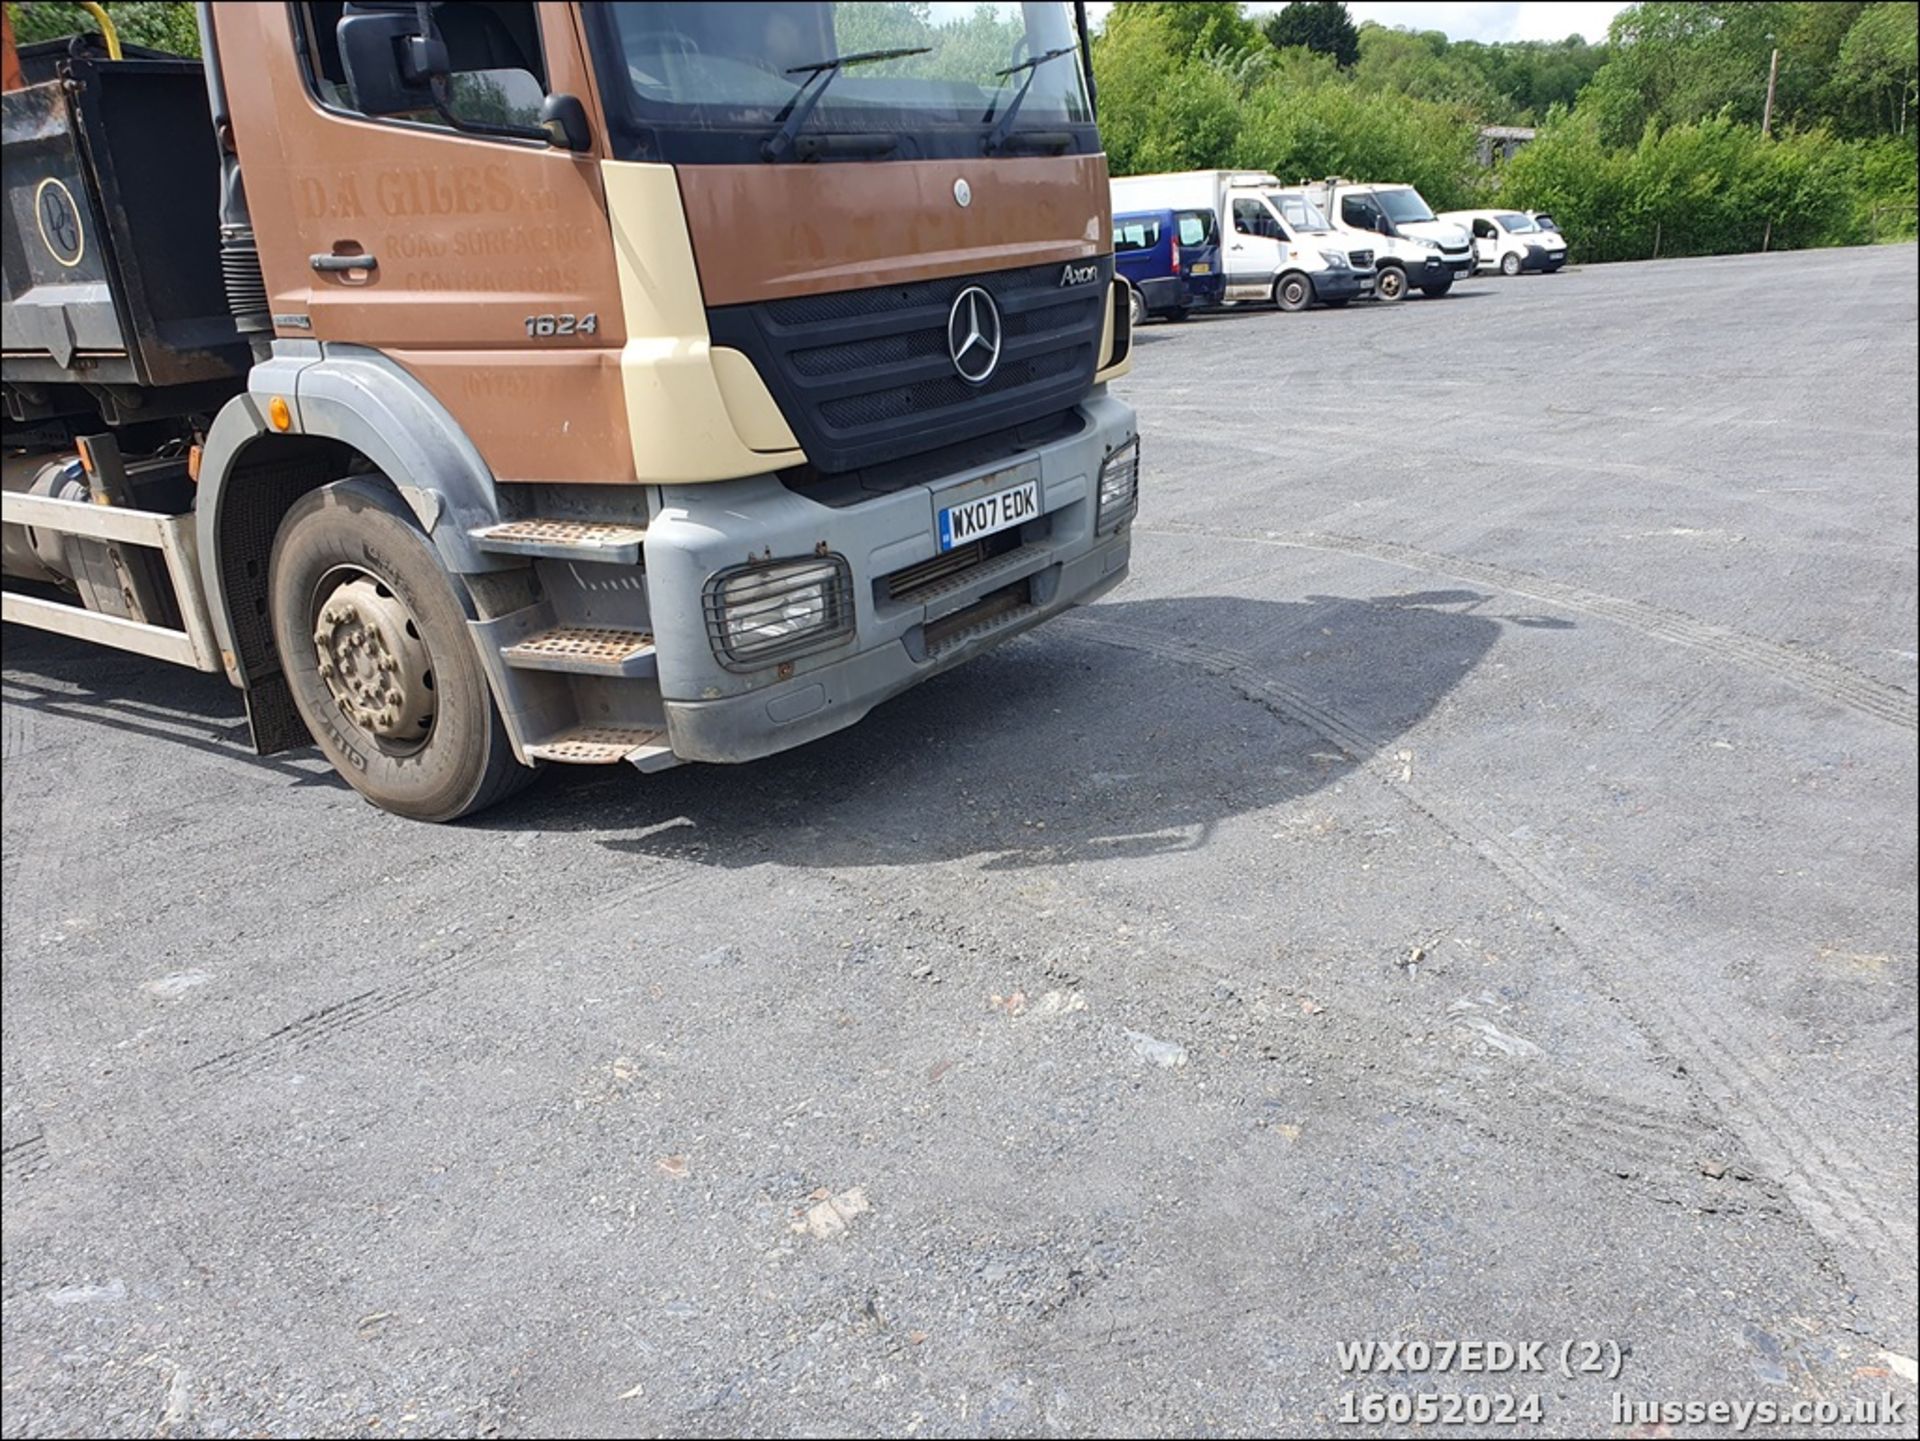 07/07 MERCEDES ATEGO - 6370cc 2dr (Brown/cream) - Image 3 of 54